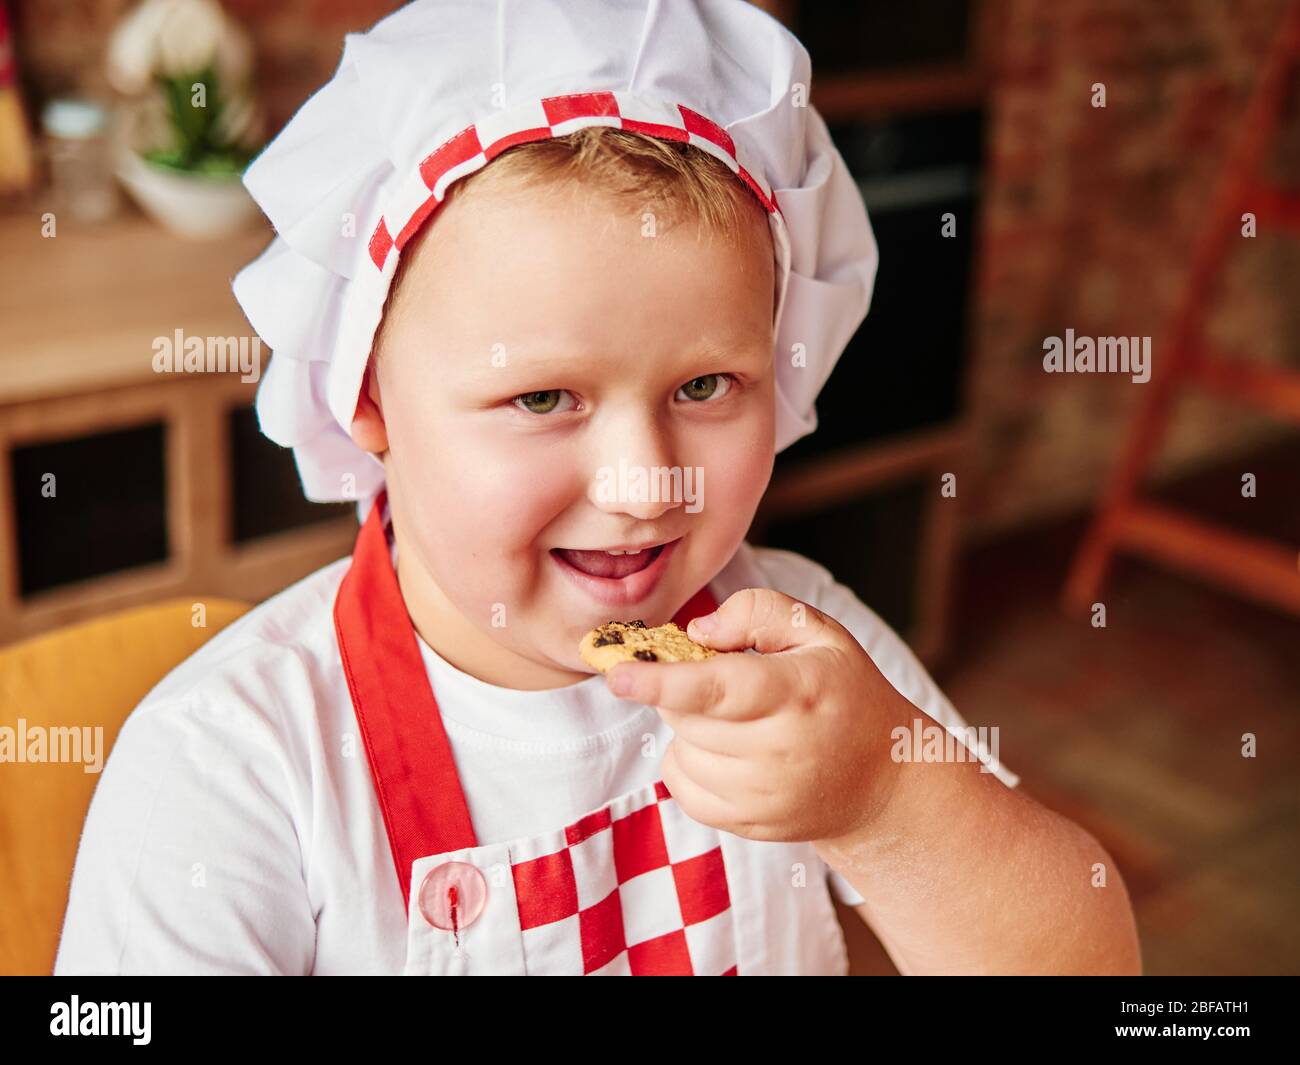 Little fat boy is eating a cake at home kitchen. Happy kids and childhood concept. Child's obesity concept. Stock Photo